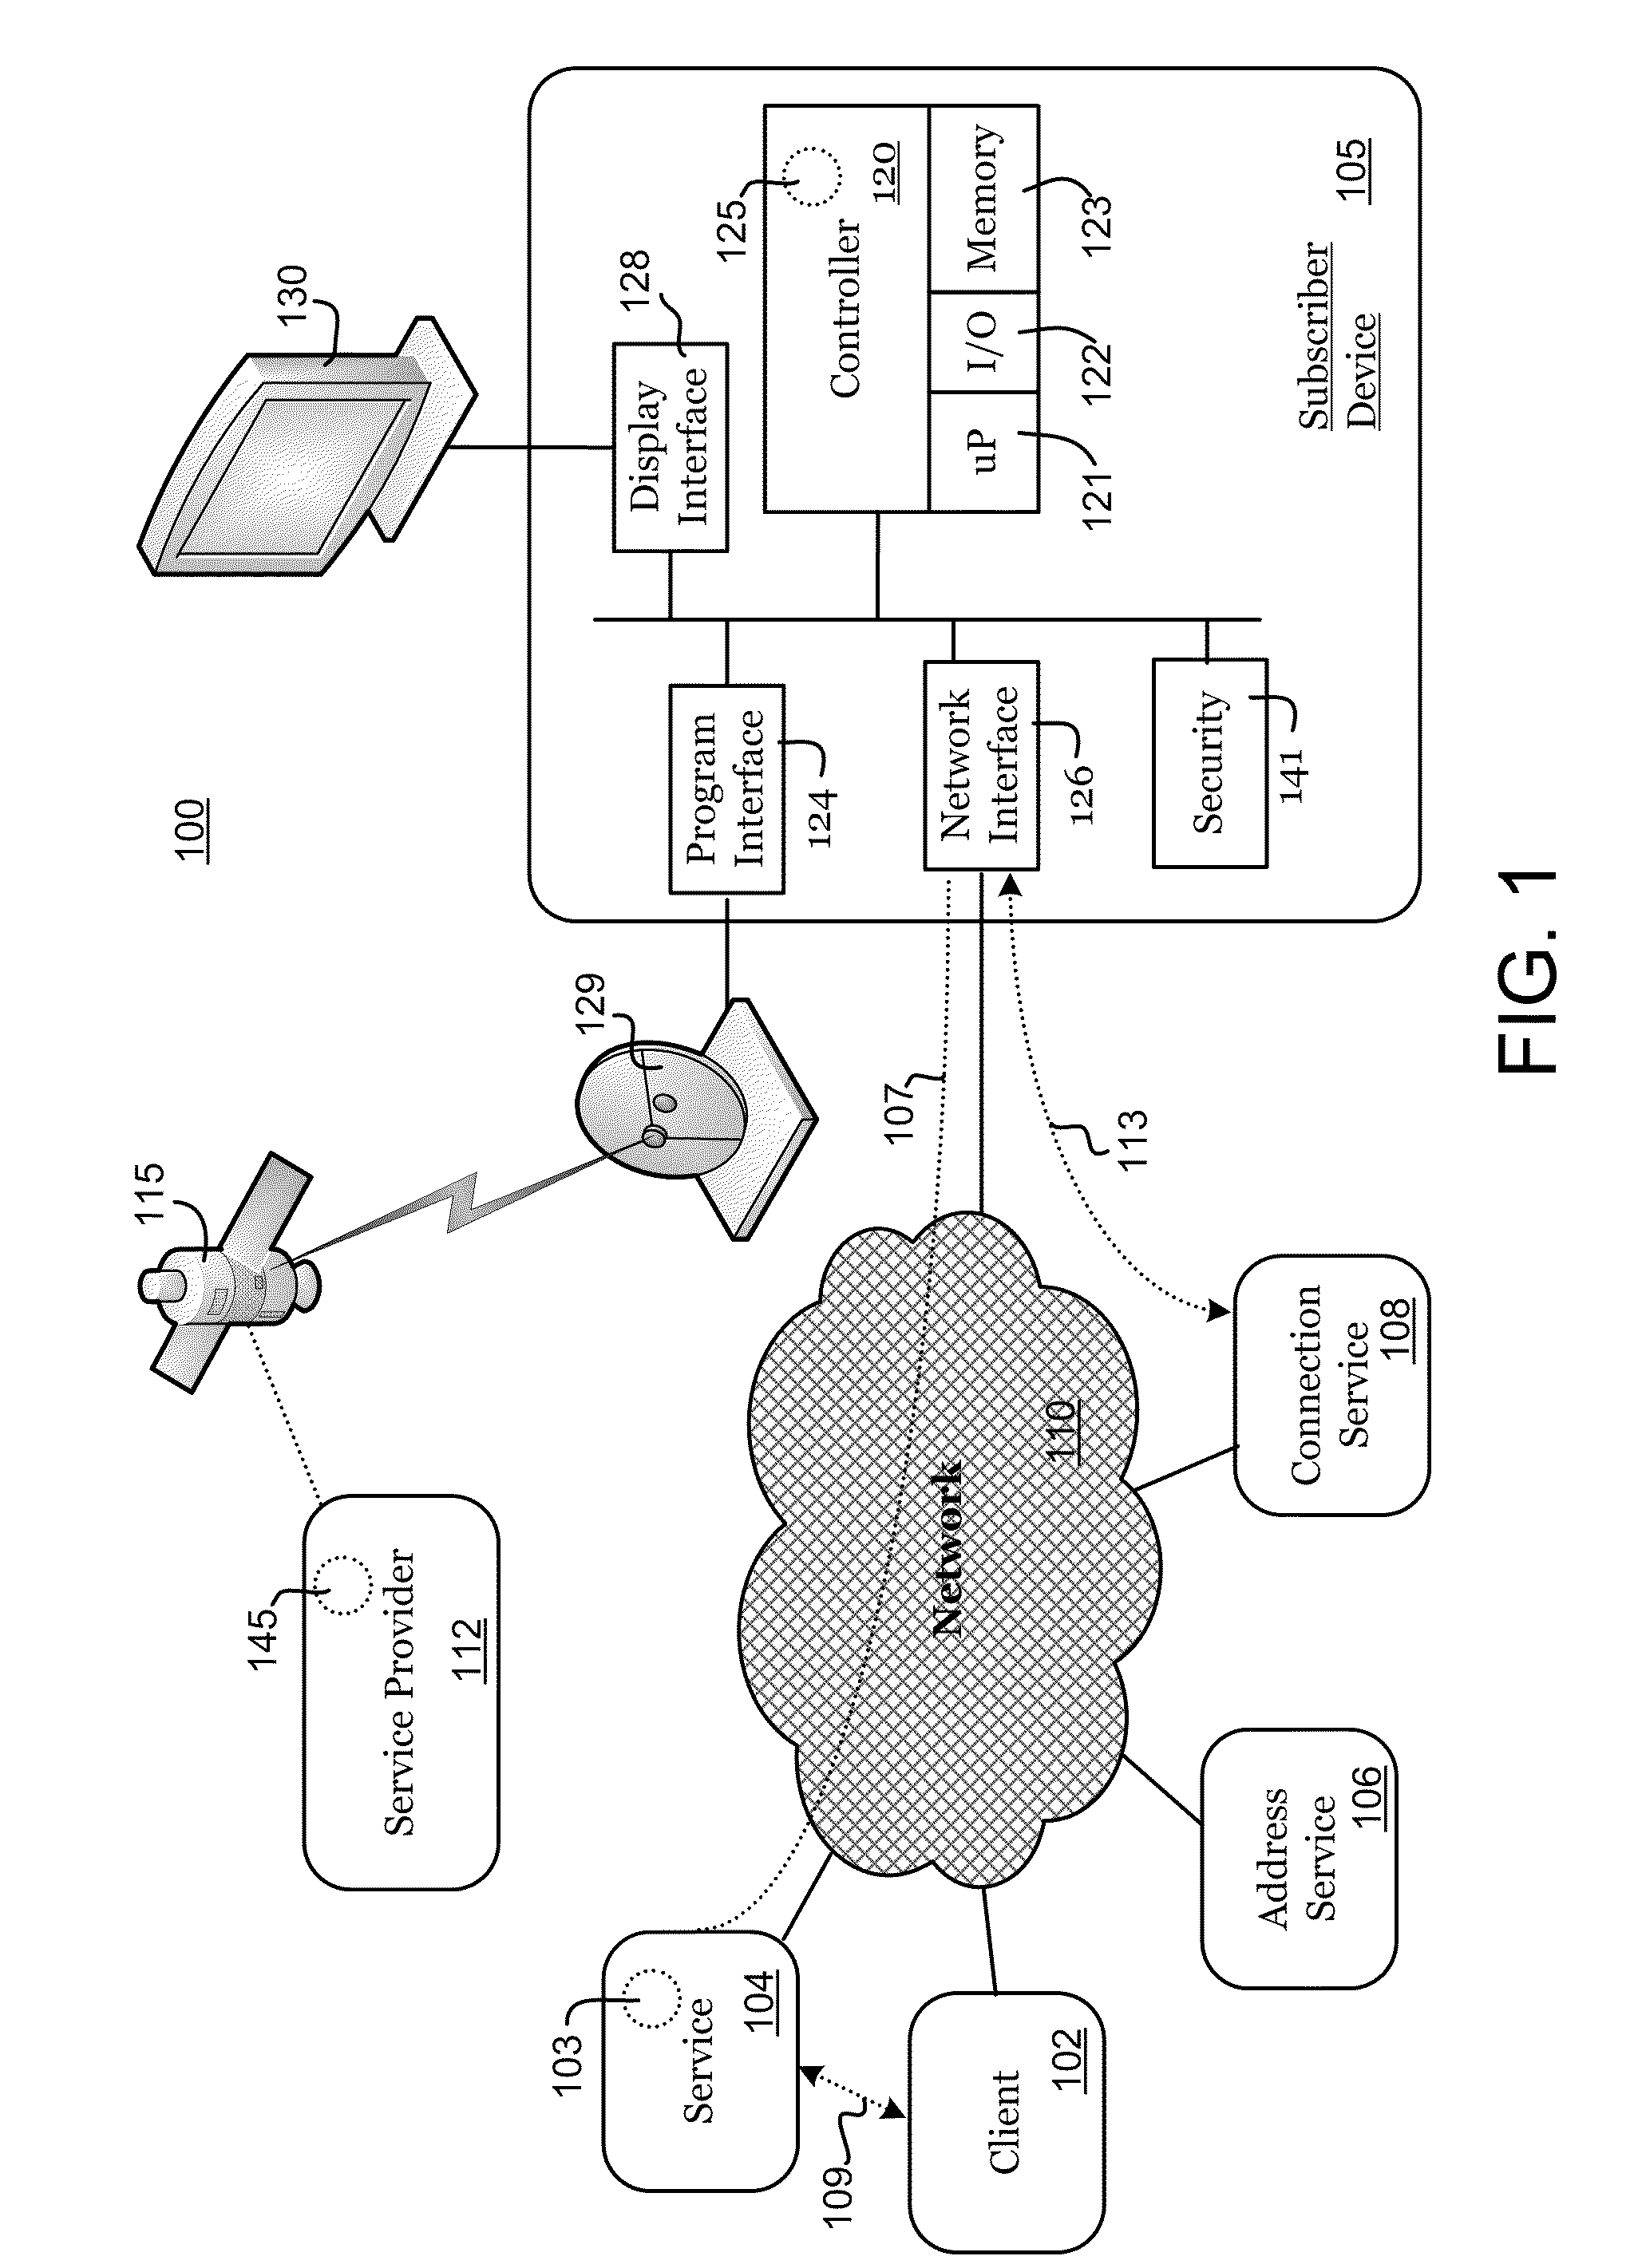 Systems and methods for authorizing access to network services using information obtained from subscriber equipment